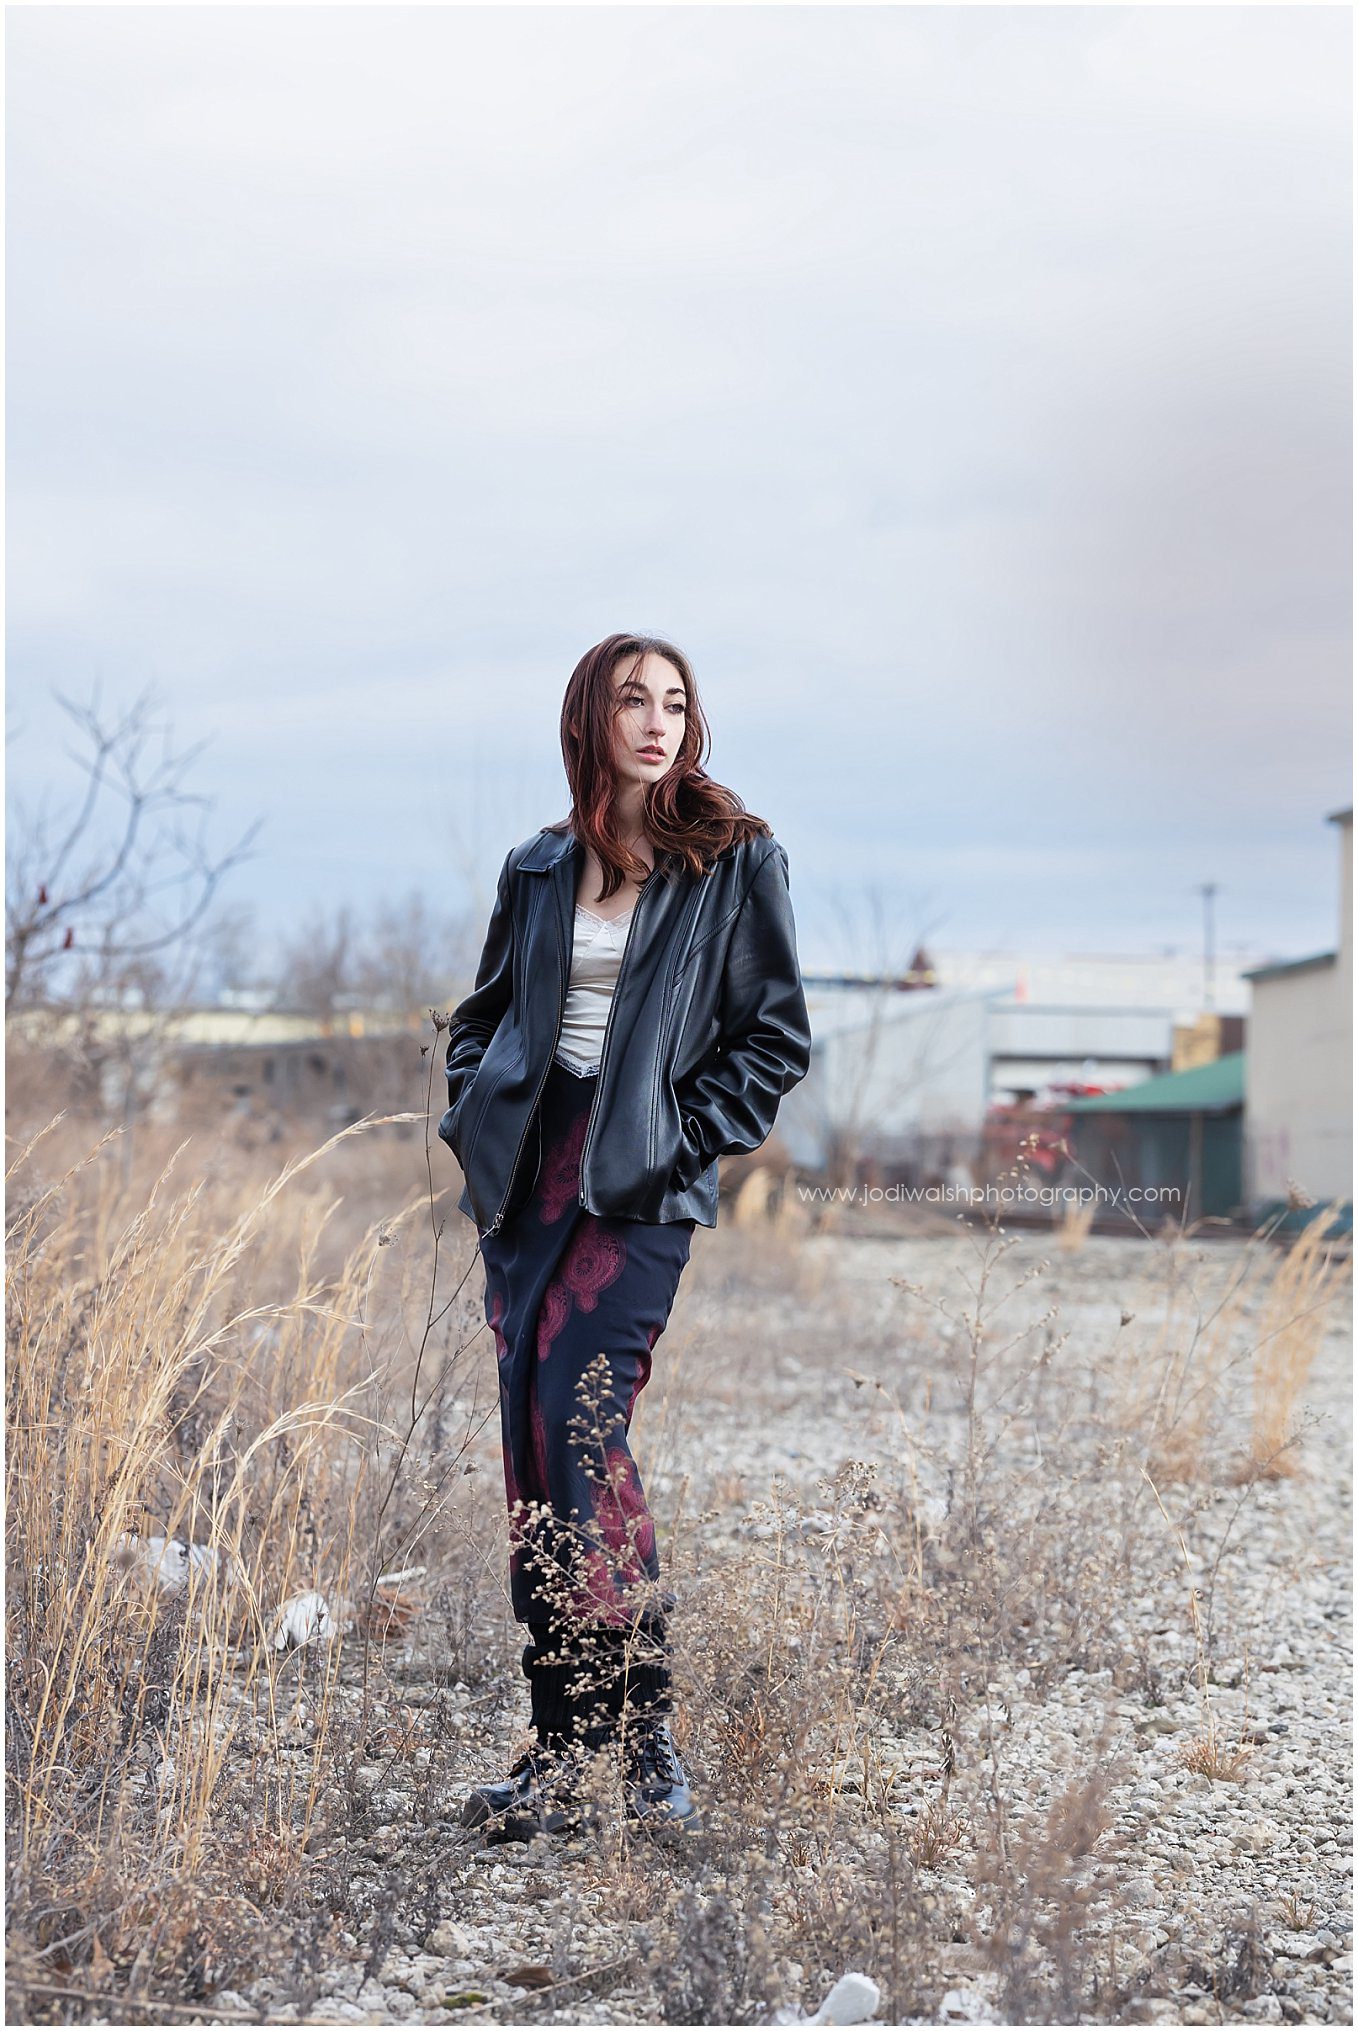 image of a senior girl standing in an empty alley with a stretch of tall grasses off to the left side. There's a row of warehouses in the distance. She's wearing a long deep red and black skirt and a black leather jacket.